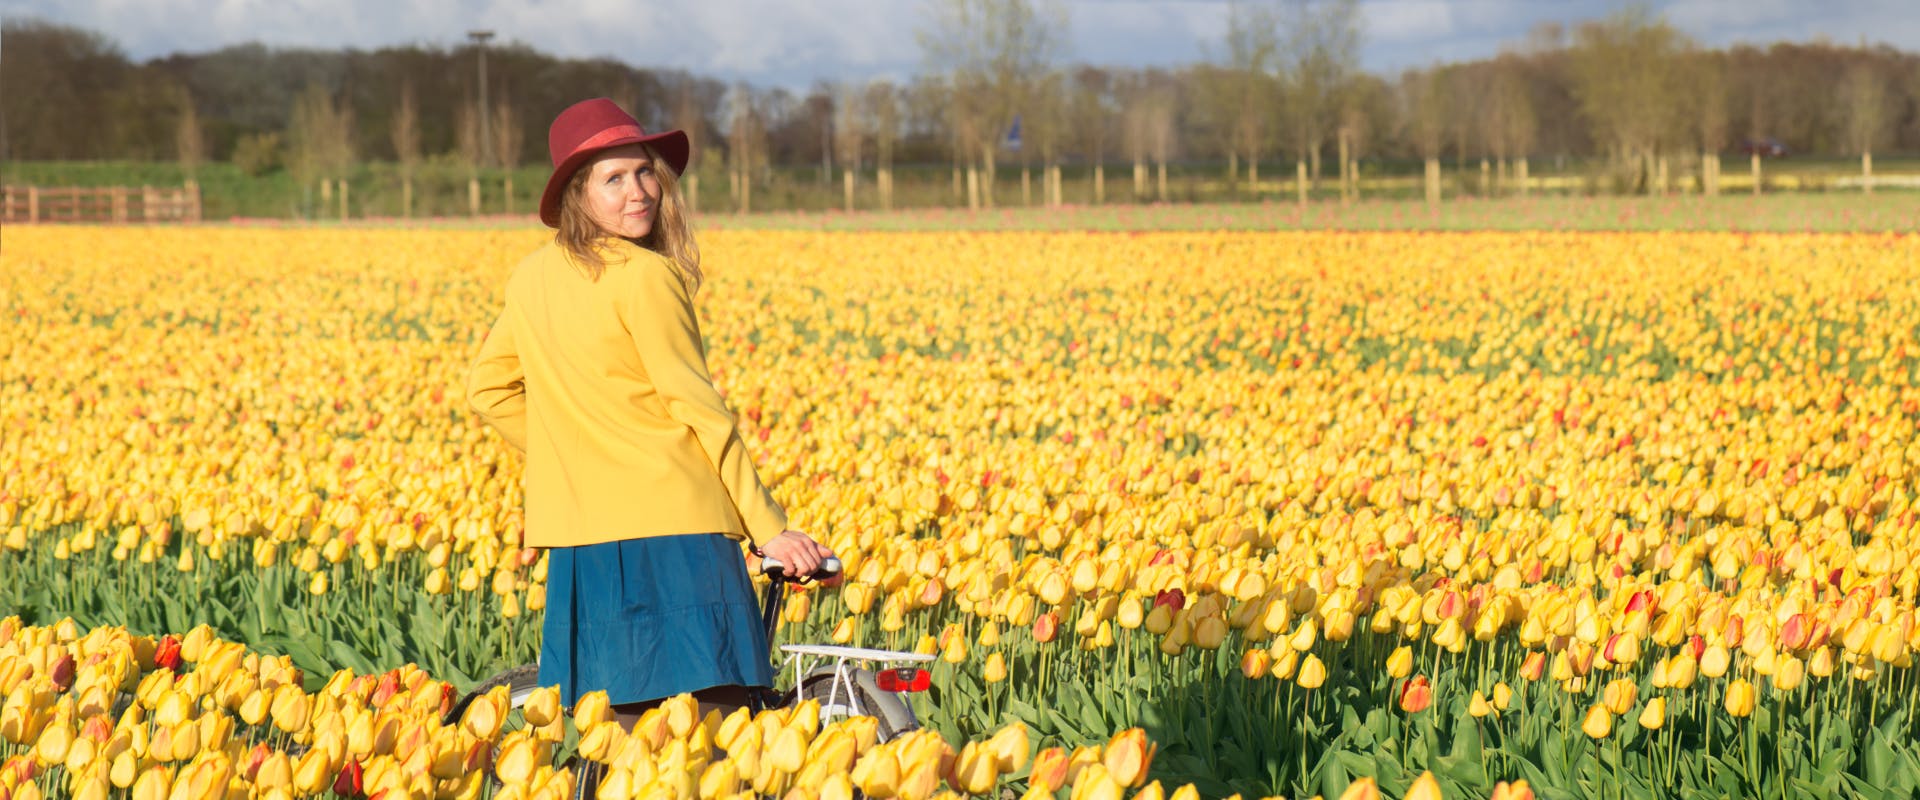 A woman standing in a field of tulips.